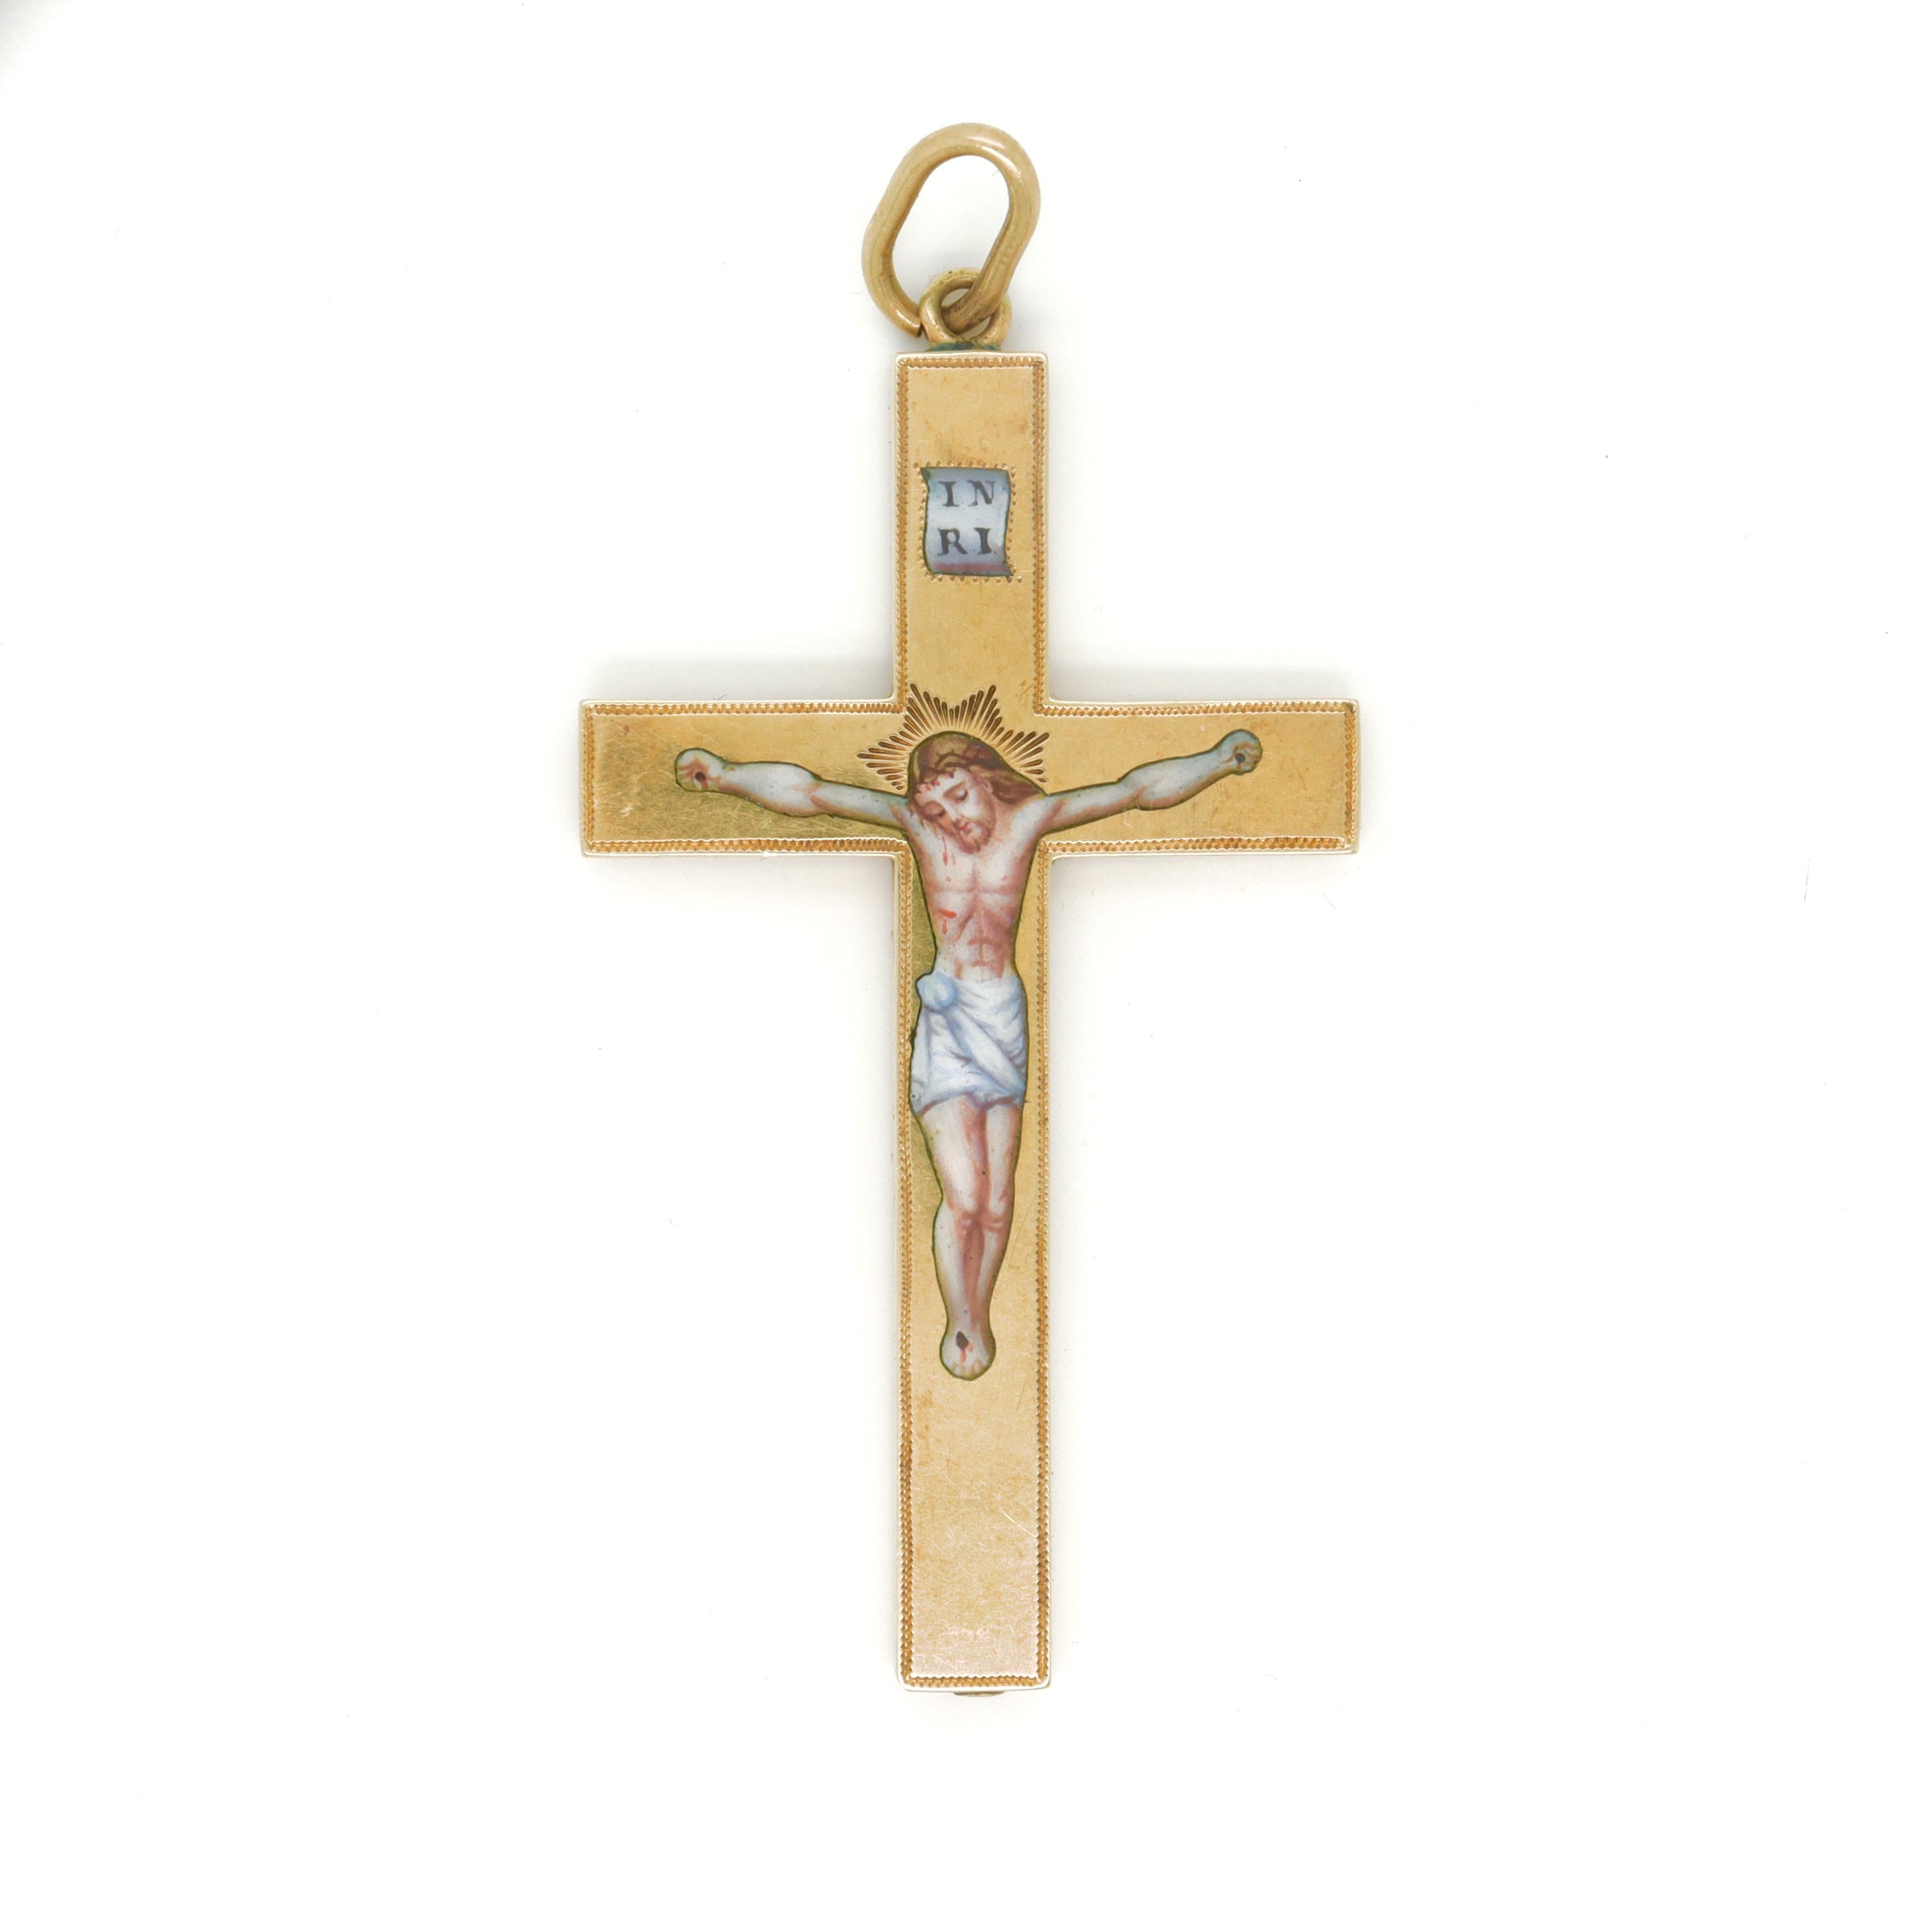 A fine antique gold and enamel crucifix.

In 14k gold.

With an enameled depiction of Christ and the Titulus Crucis (title of the cross).

Likely Eastern Orthodox in origin.

With an integral bail and attached jump ring.

Simply a wonderful crucifix